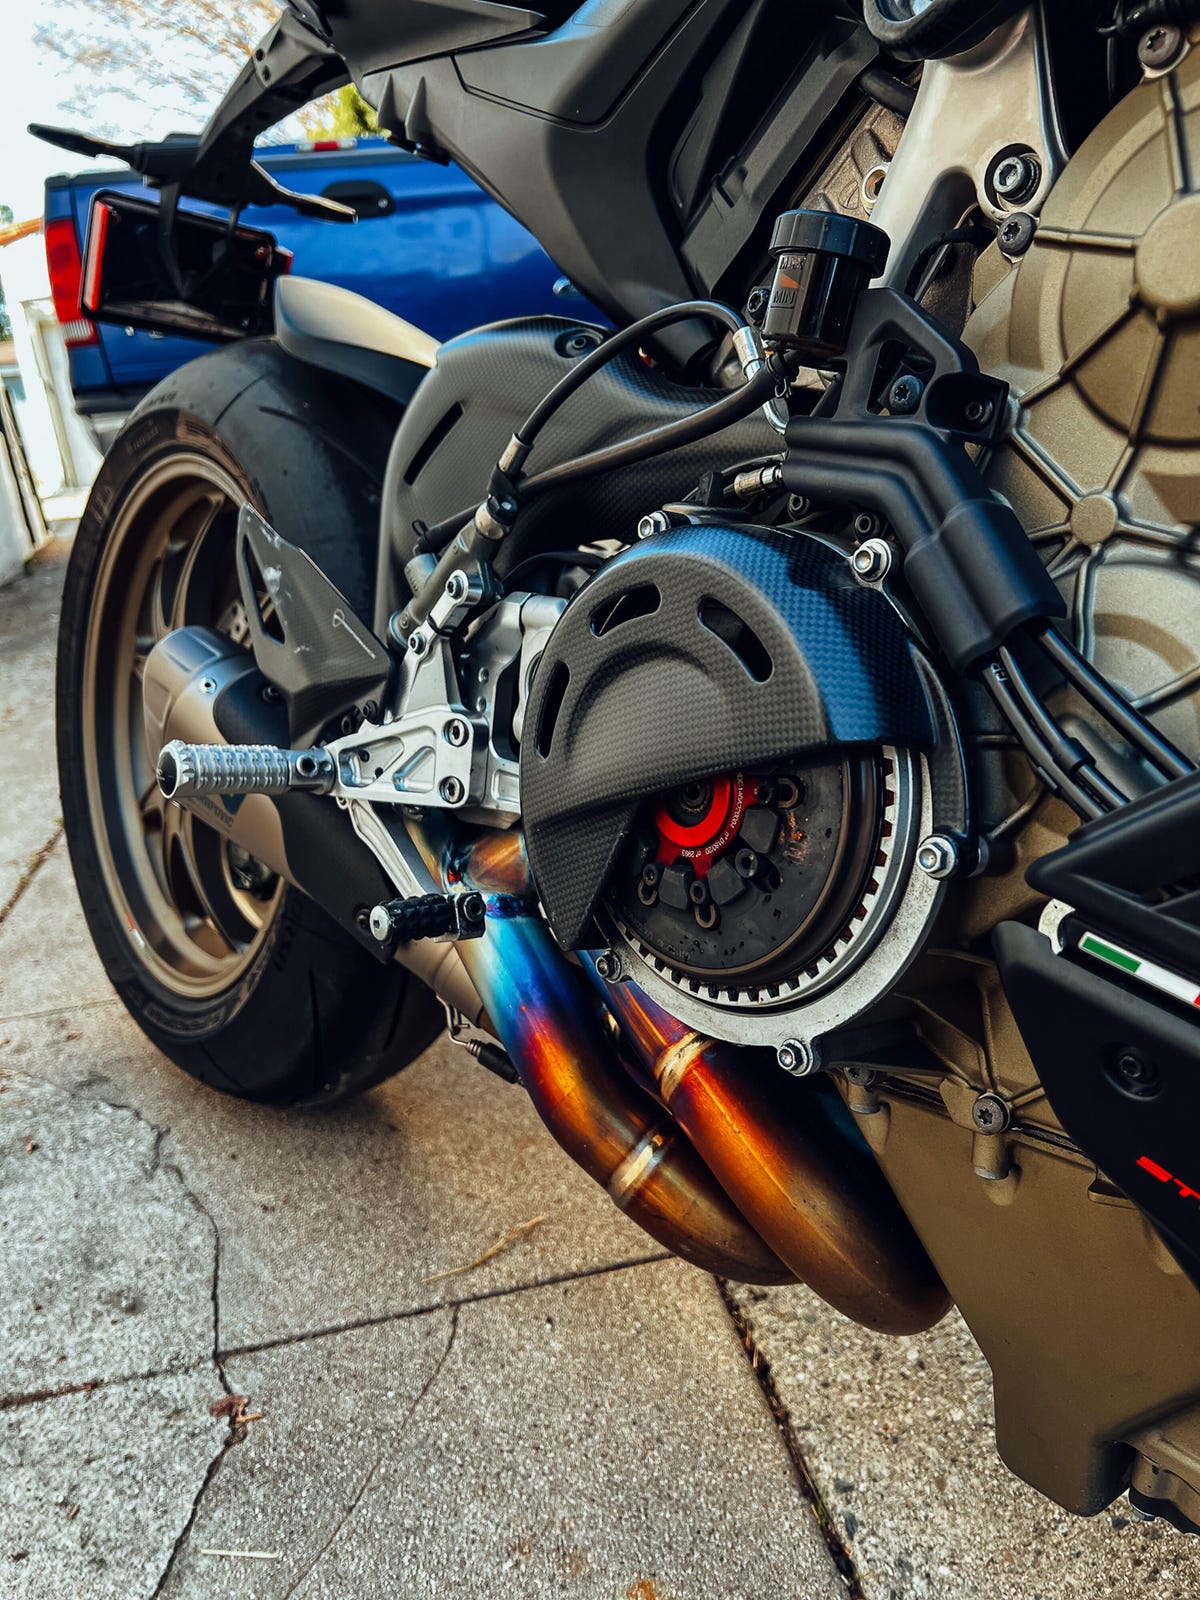 Ducati Streetfighter V4 S with accessories